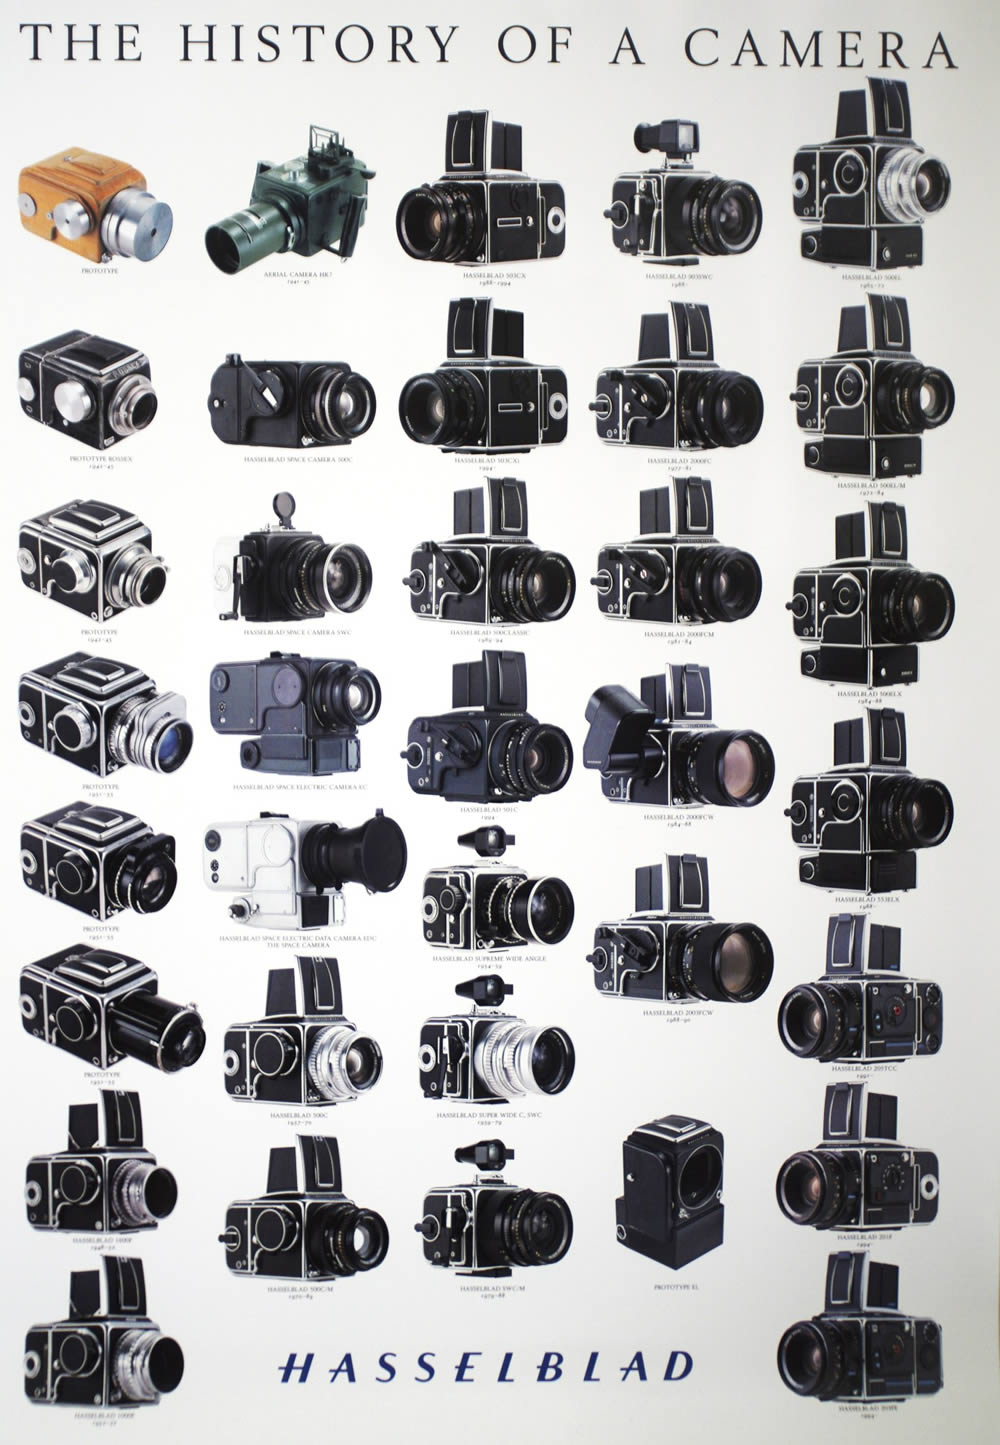 Hasselblad System Poster (Credit: Hasselblad Foundation)